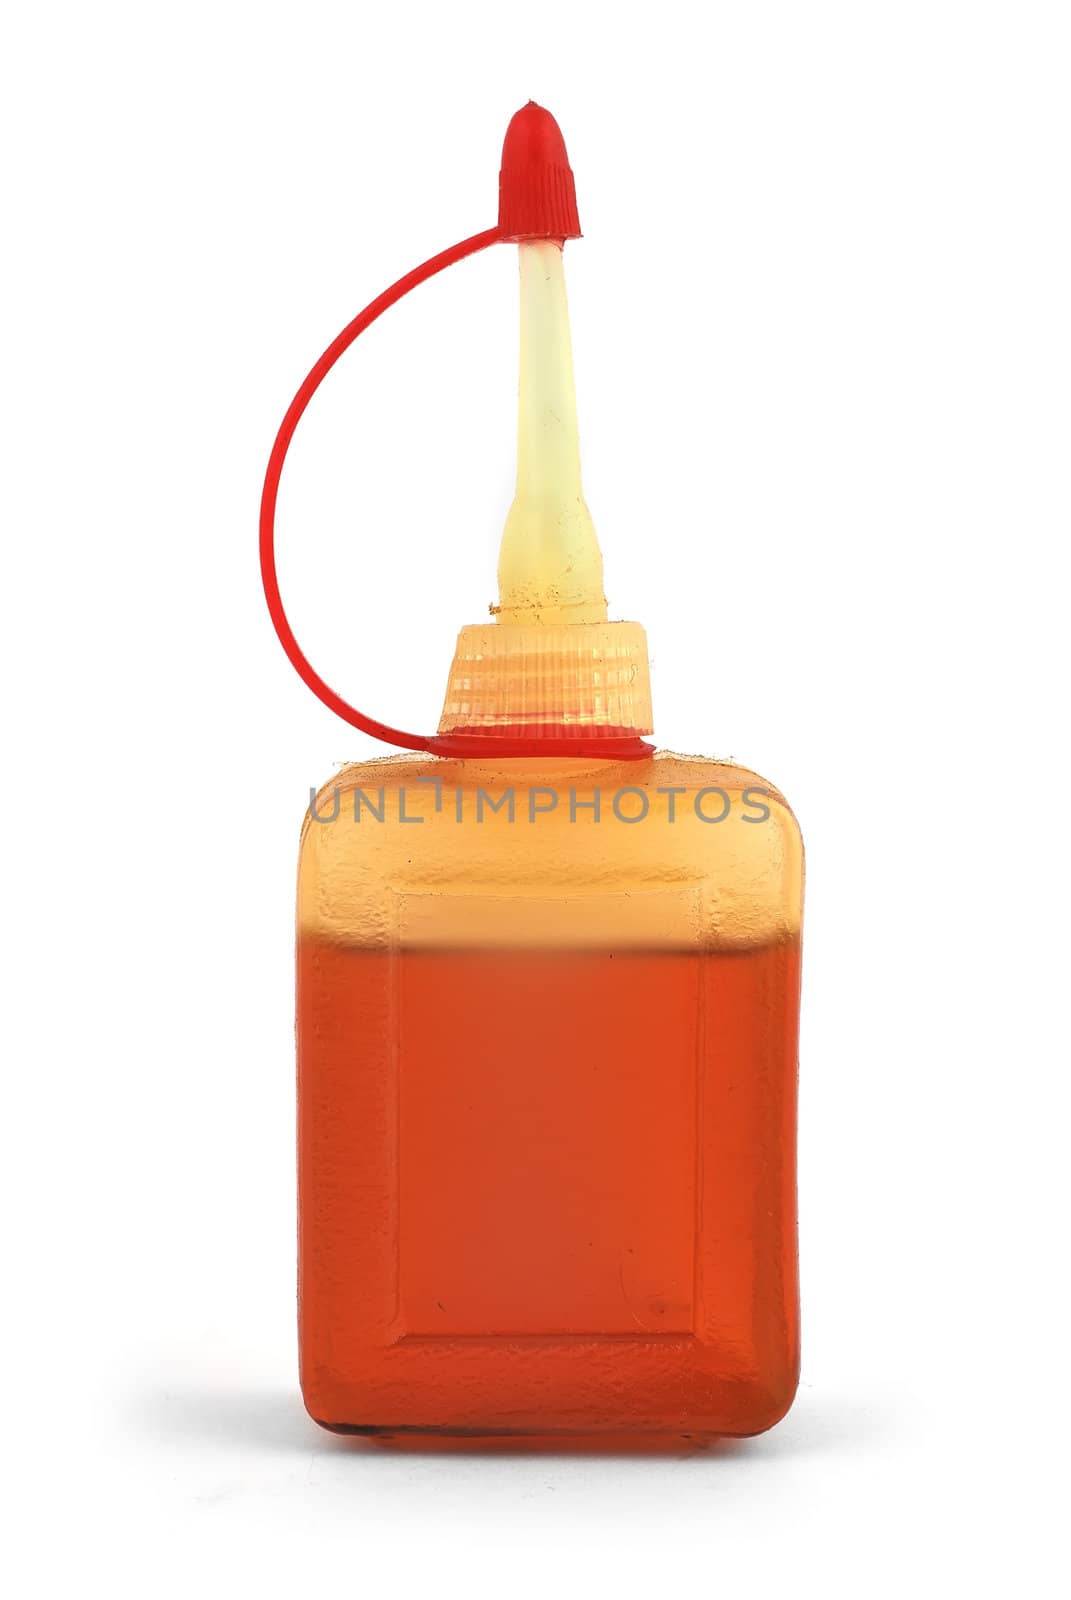 Oilcan on a white background